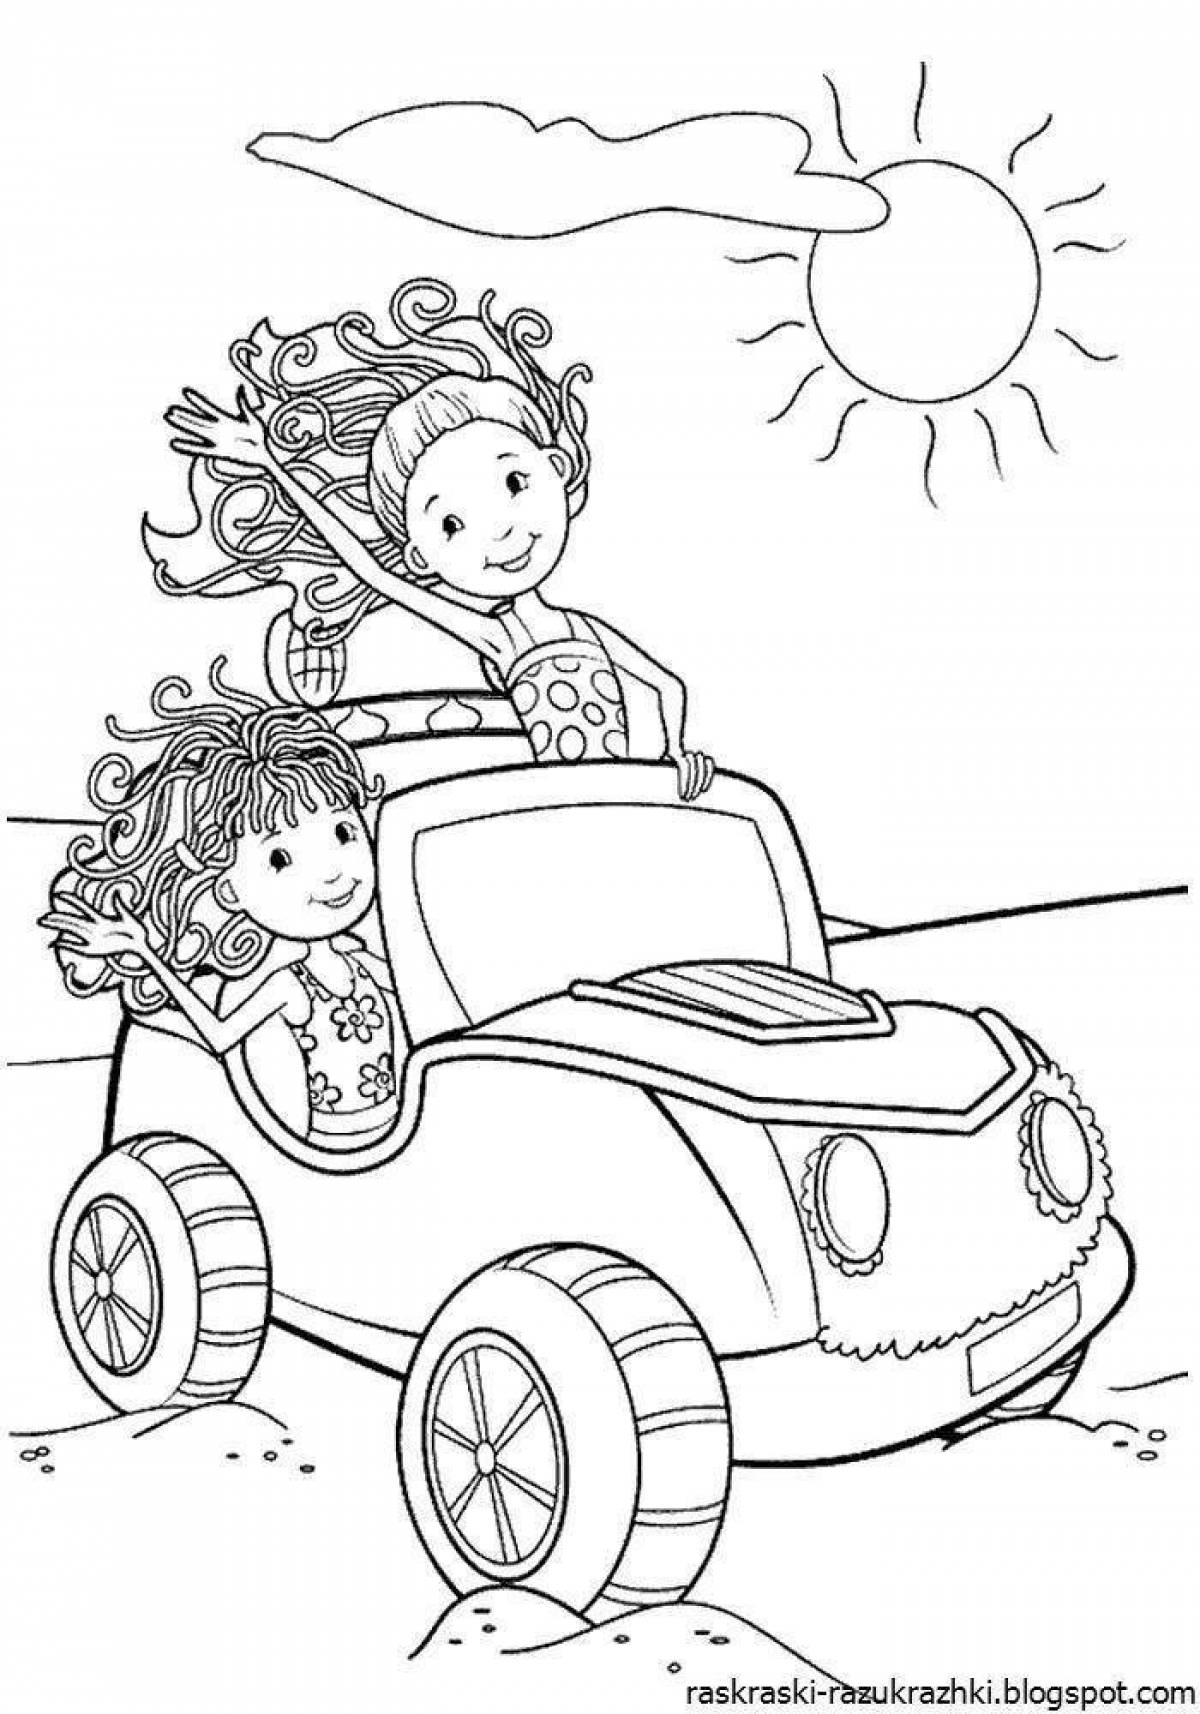 Playful car coloring for girls